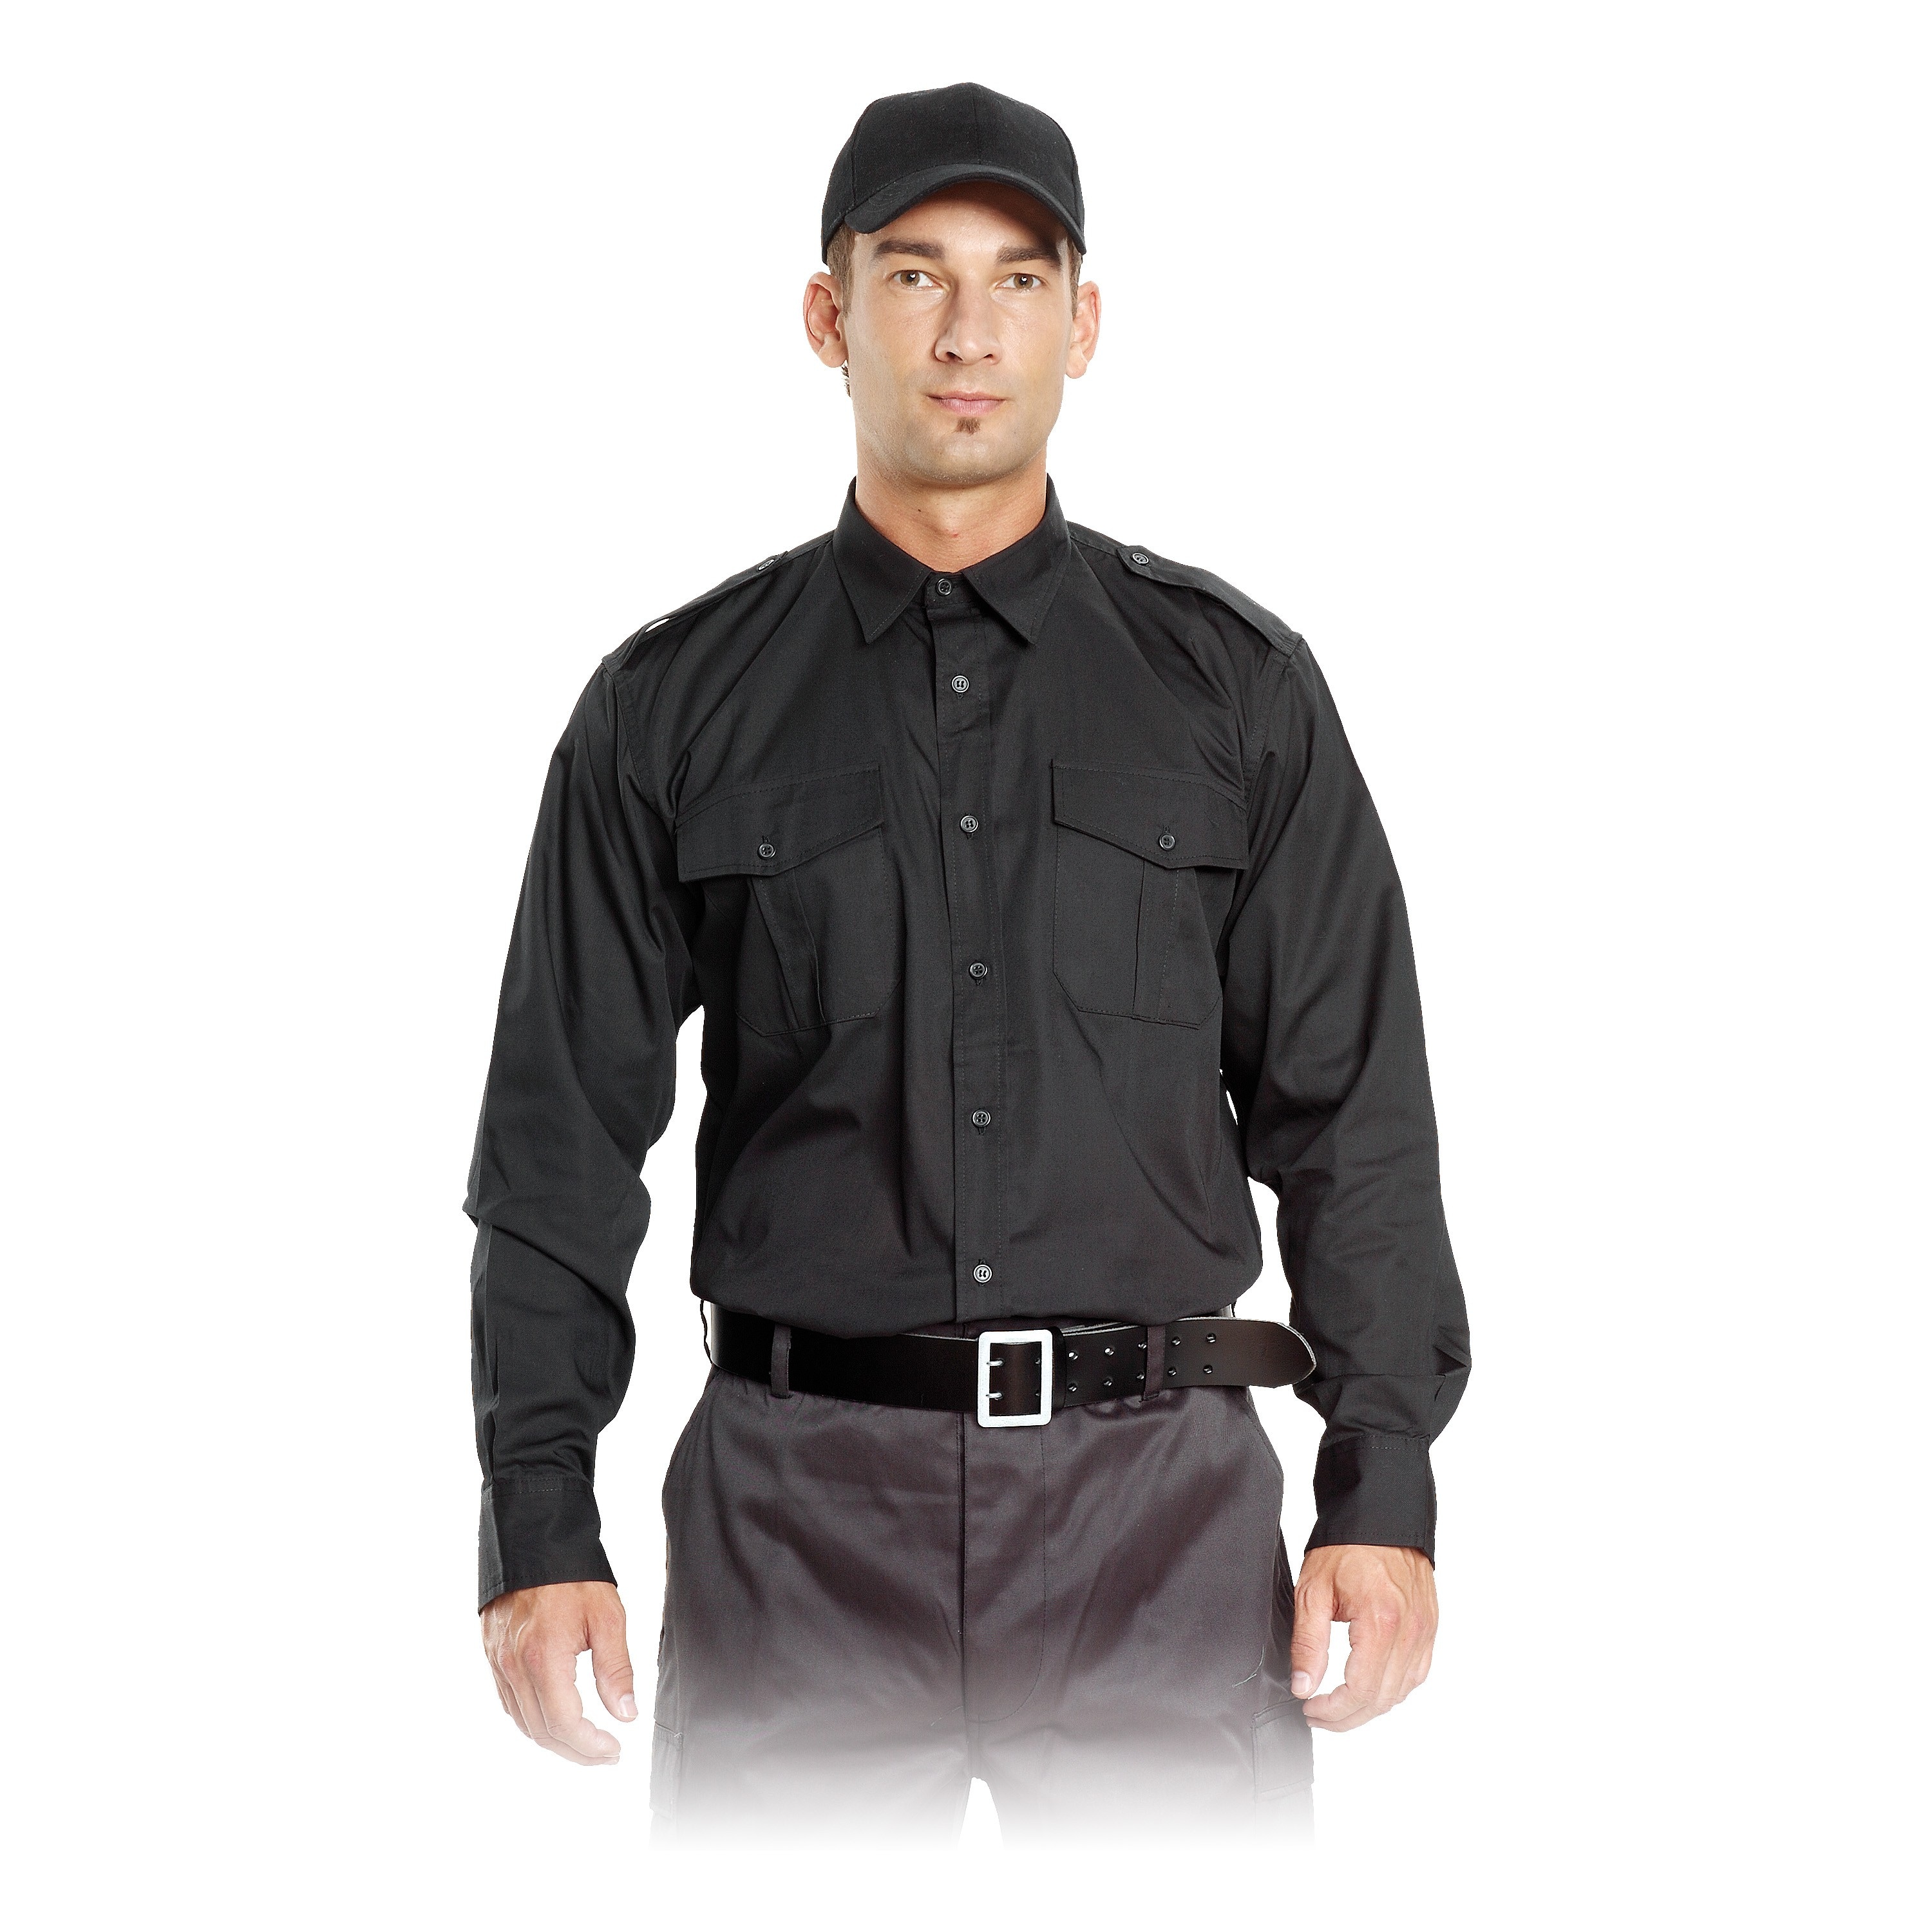 Purchase the Service Shirt Long Sleeve black by ASMC